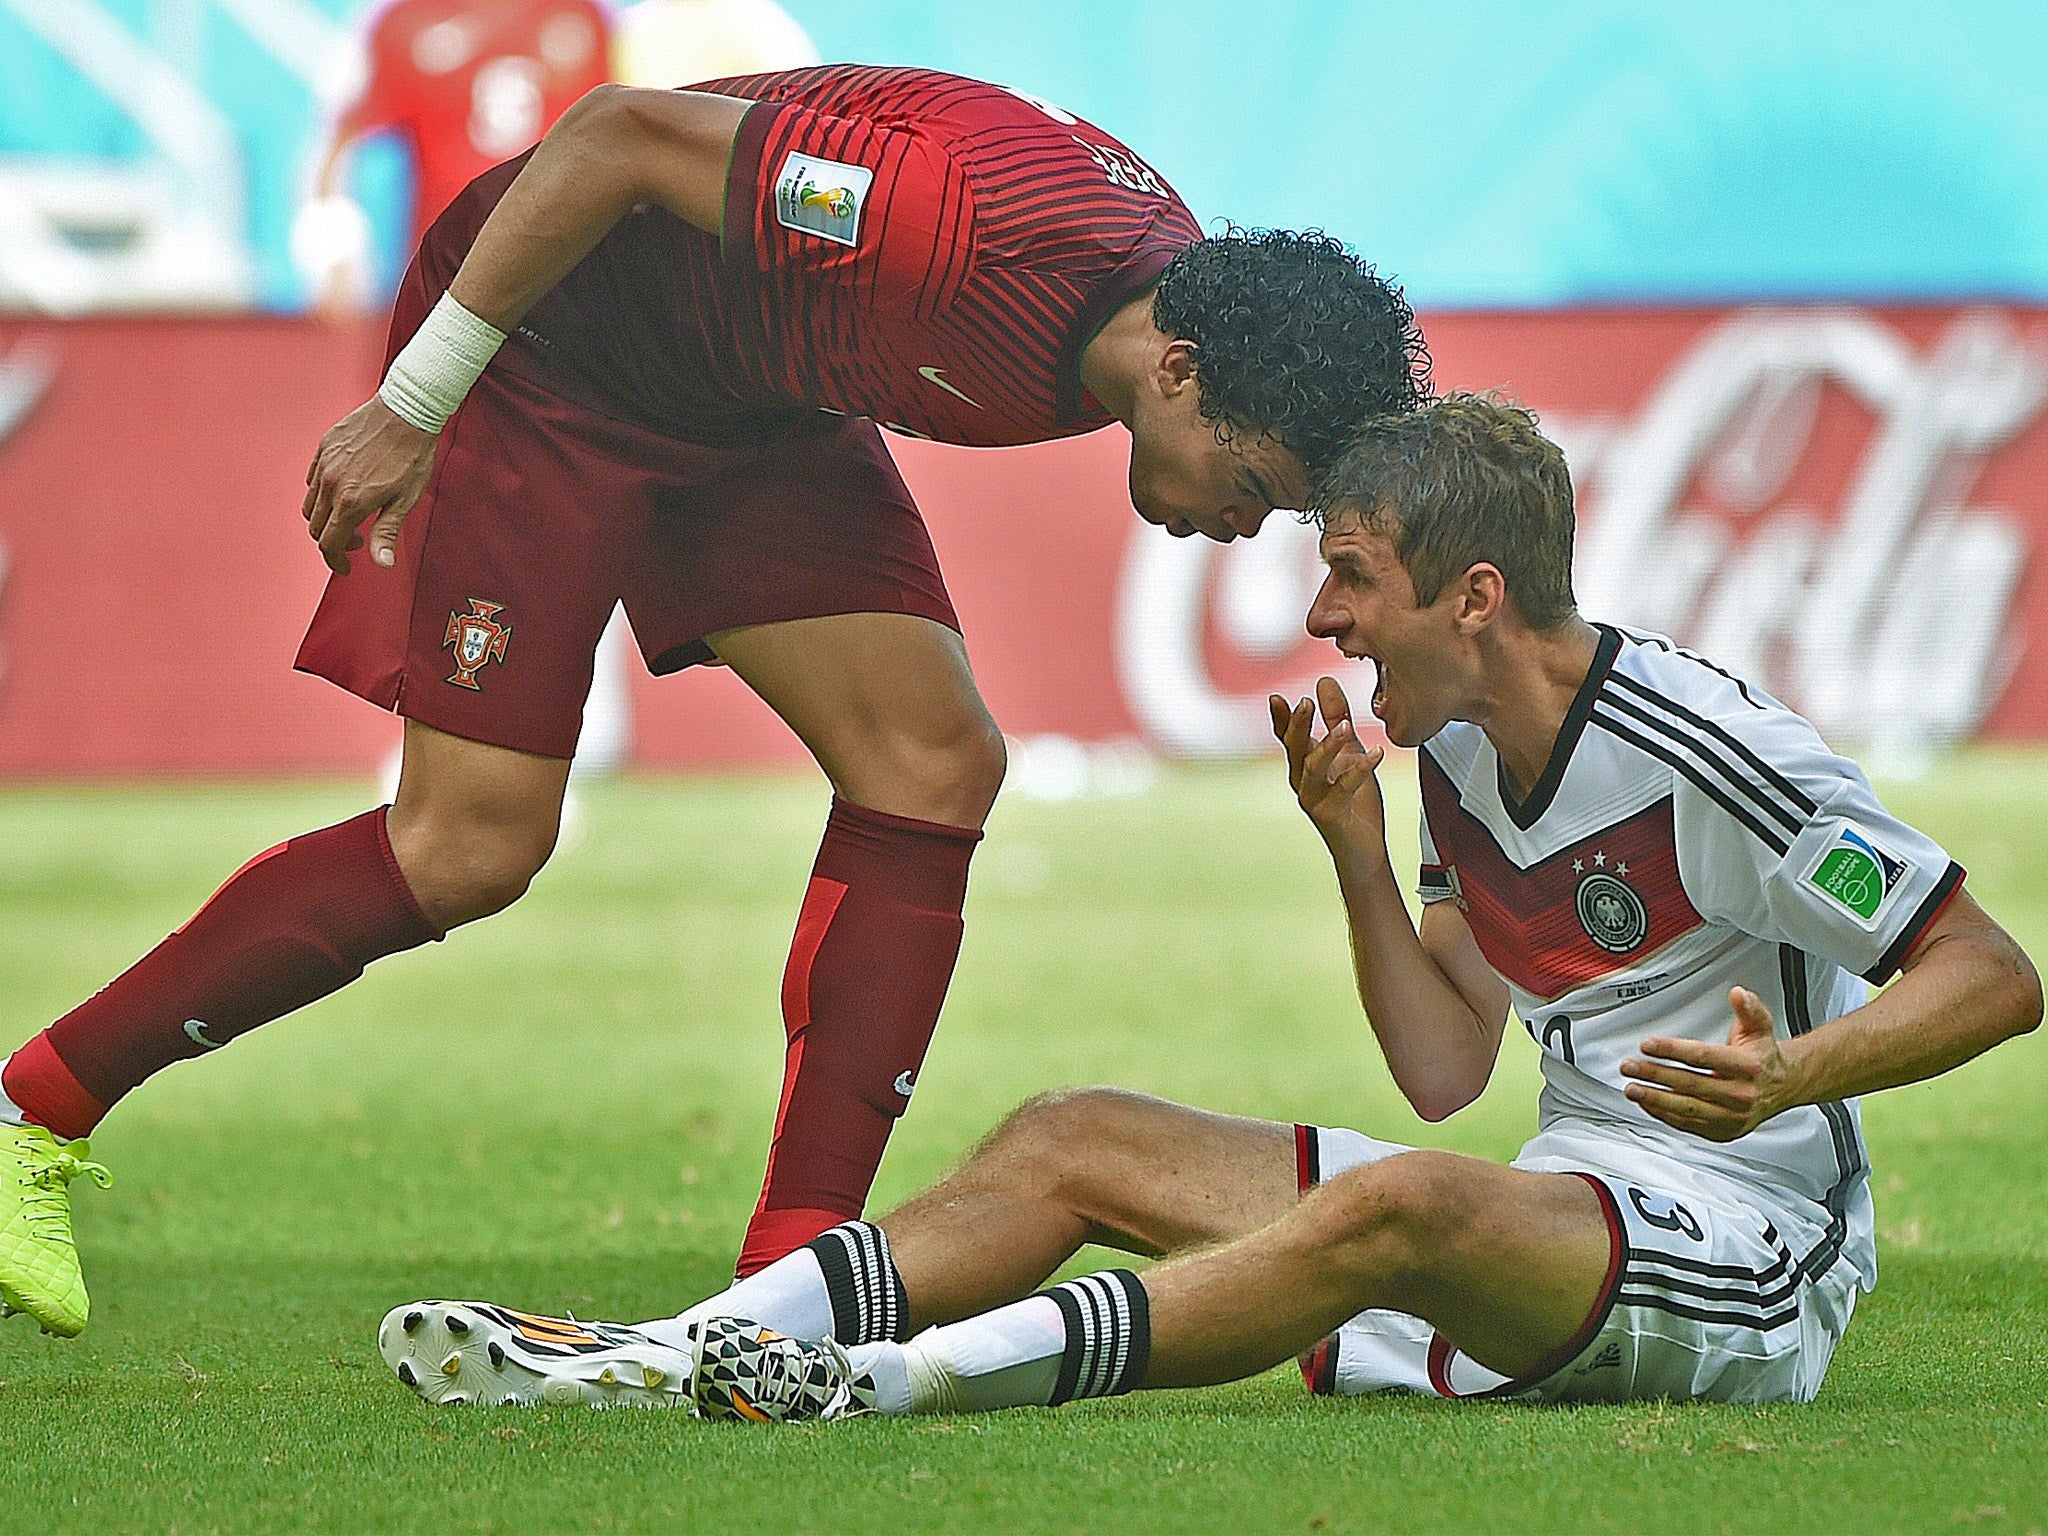 Call that a head-butt? Pepe sins by placing his head on Thomas Müller’s for which he is promptly sent off